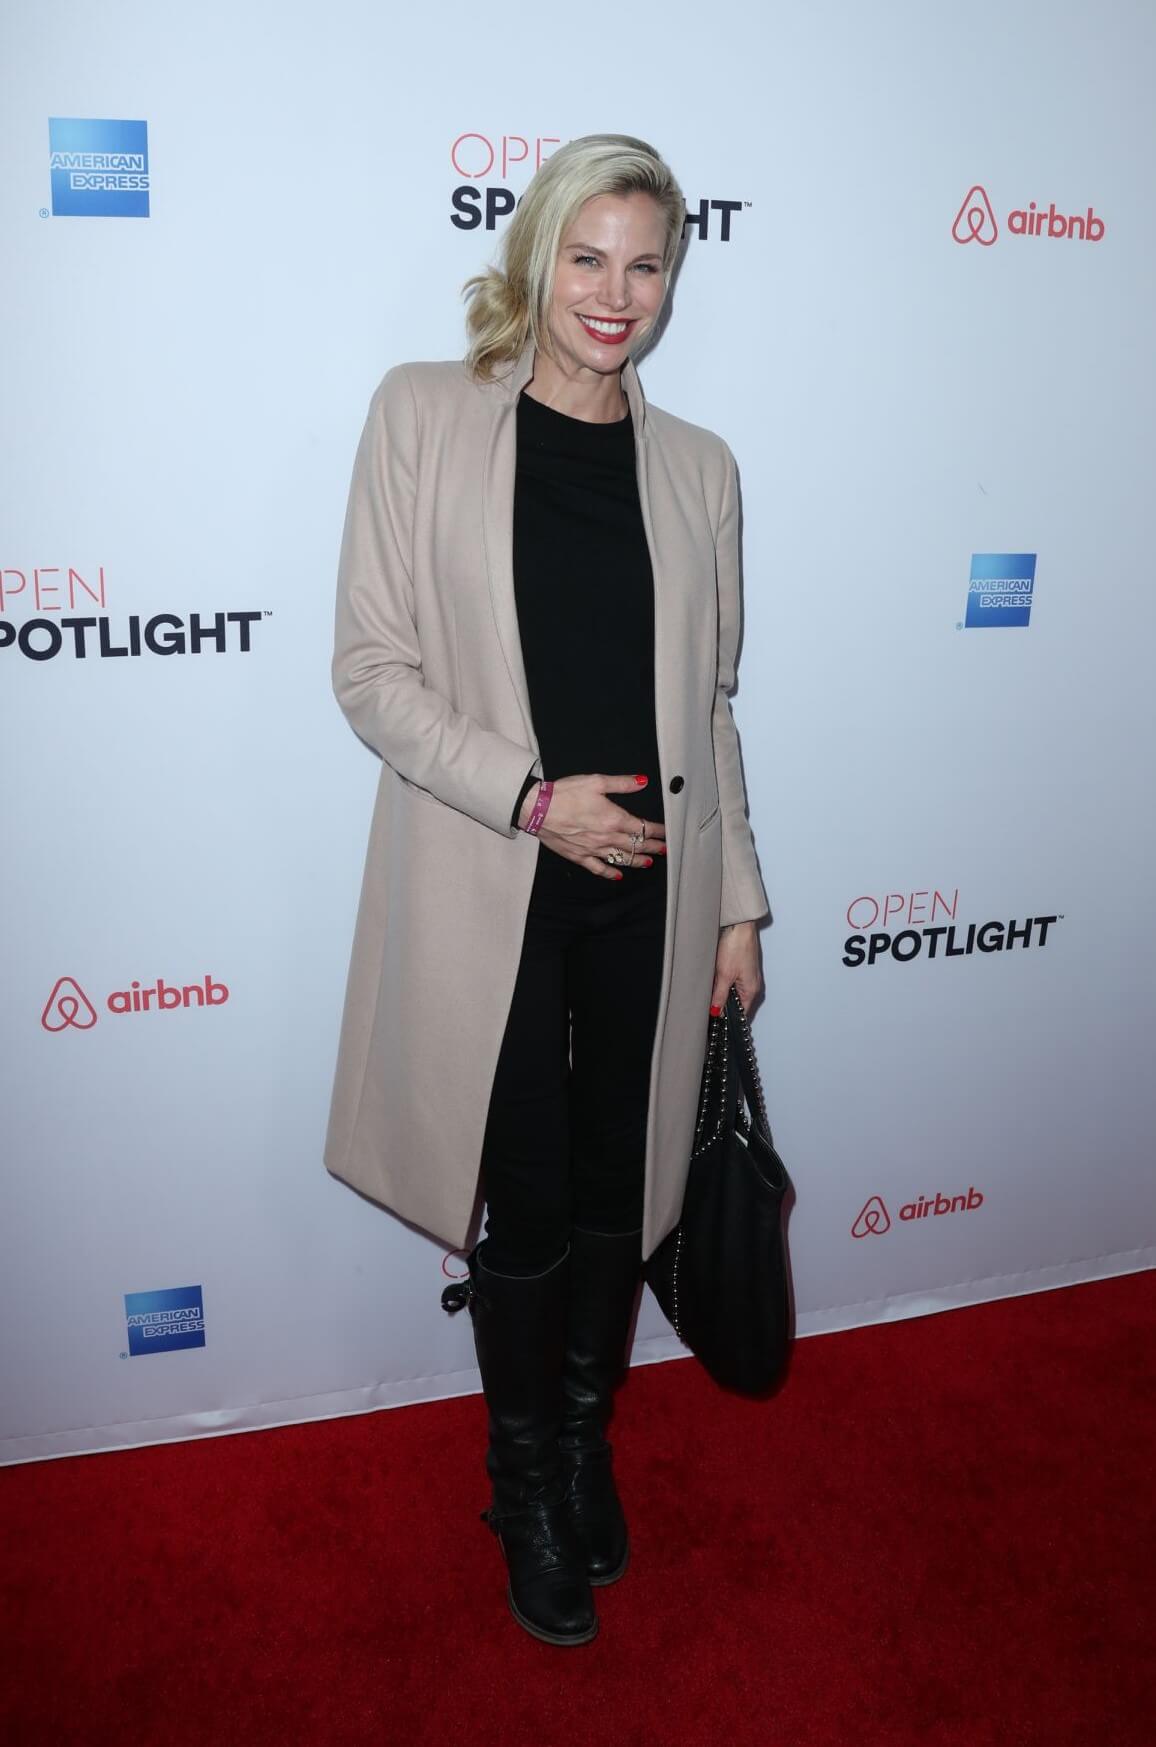 Brooke Burns  In Off White Long Coat Under Black Dress At Airbnb Open Spotlight in Los Angeles